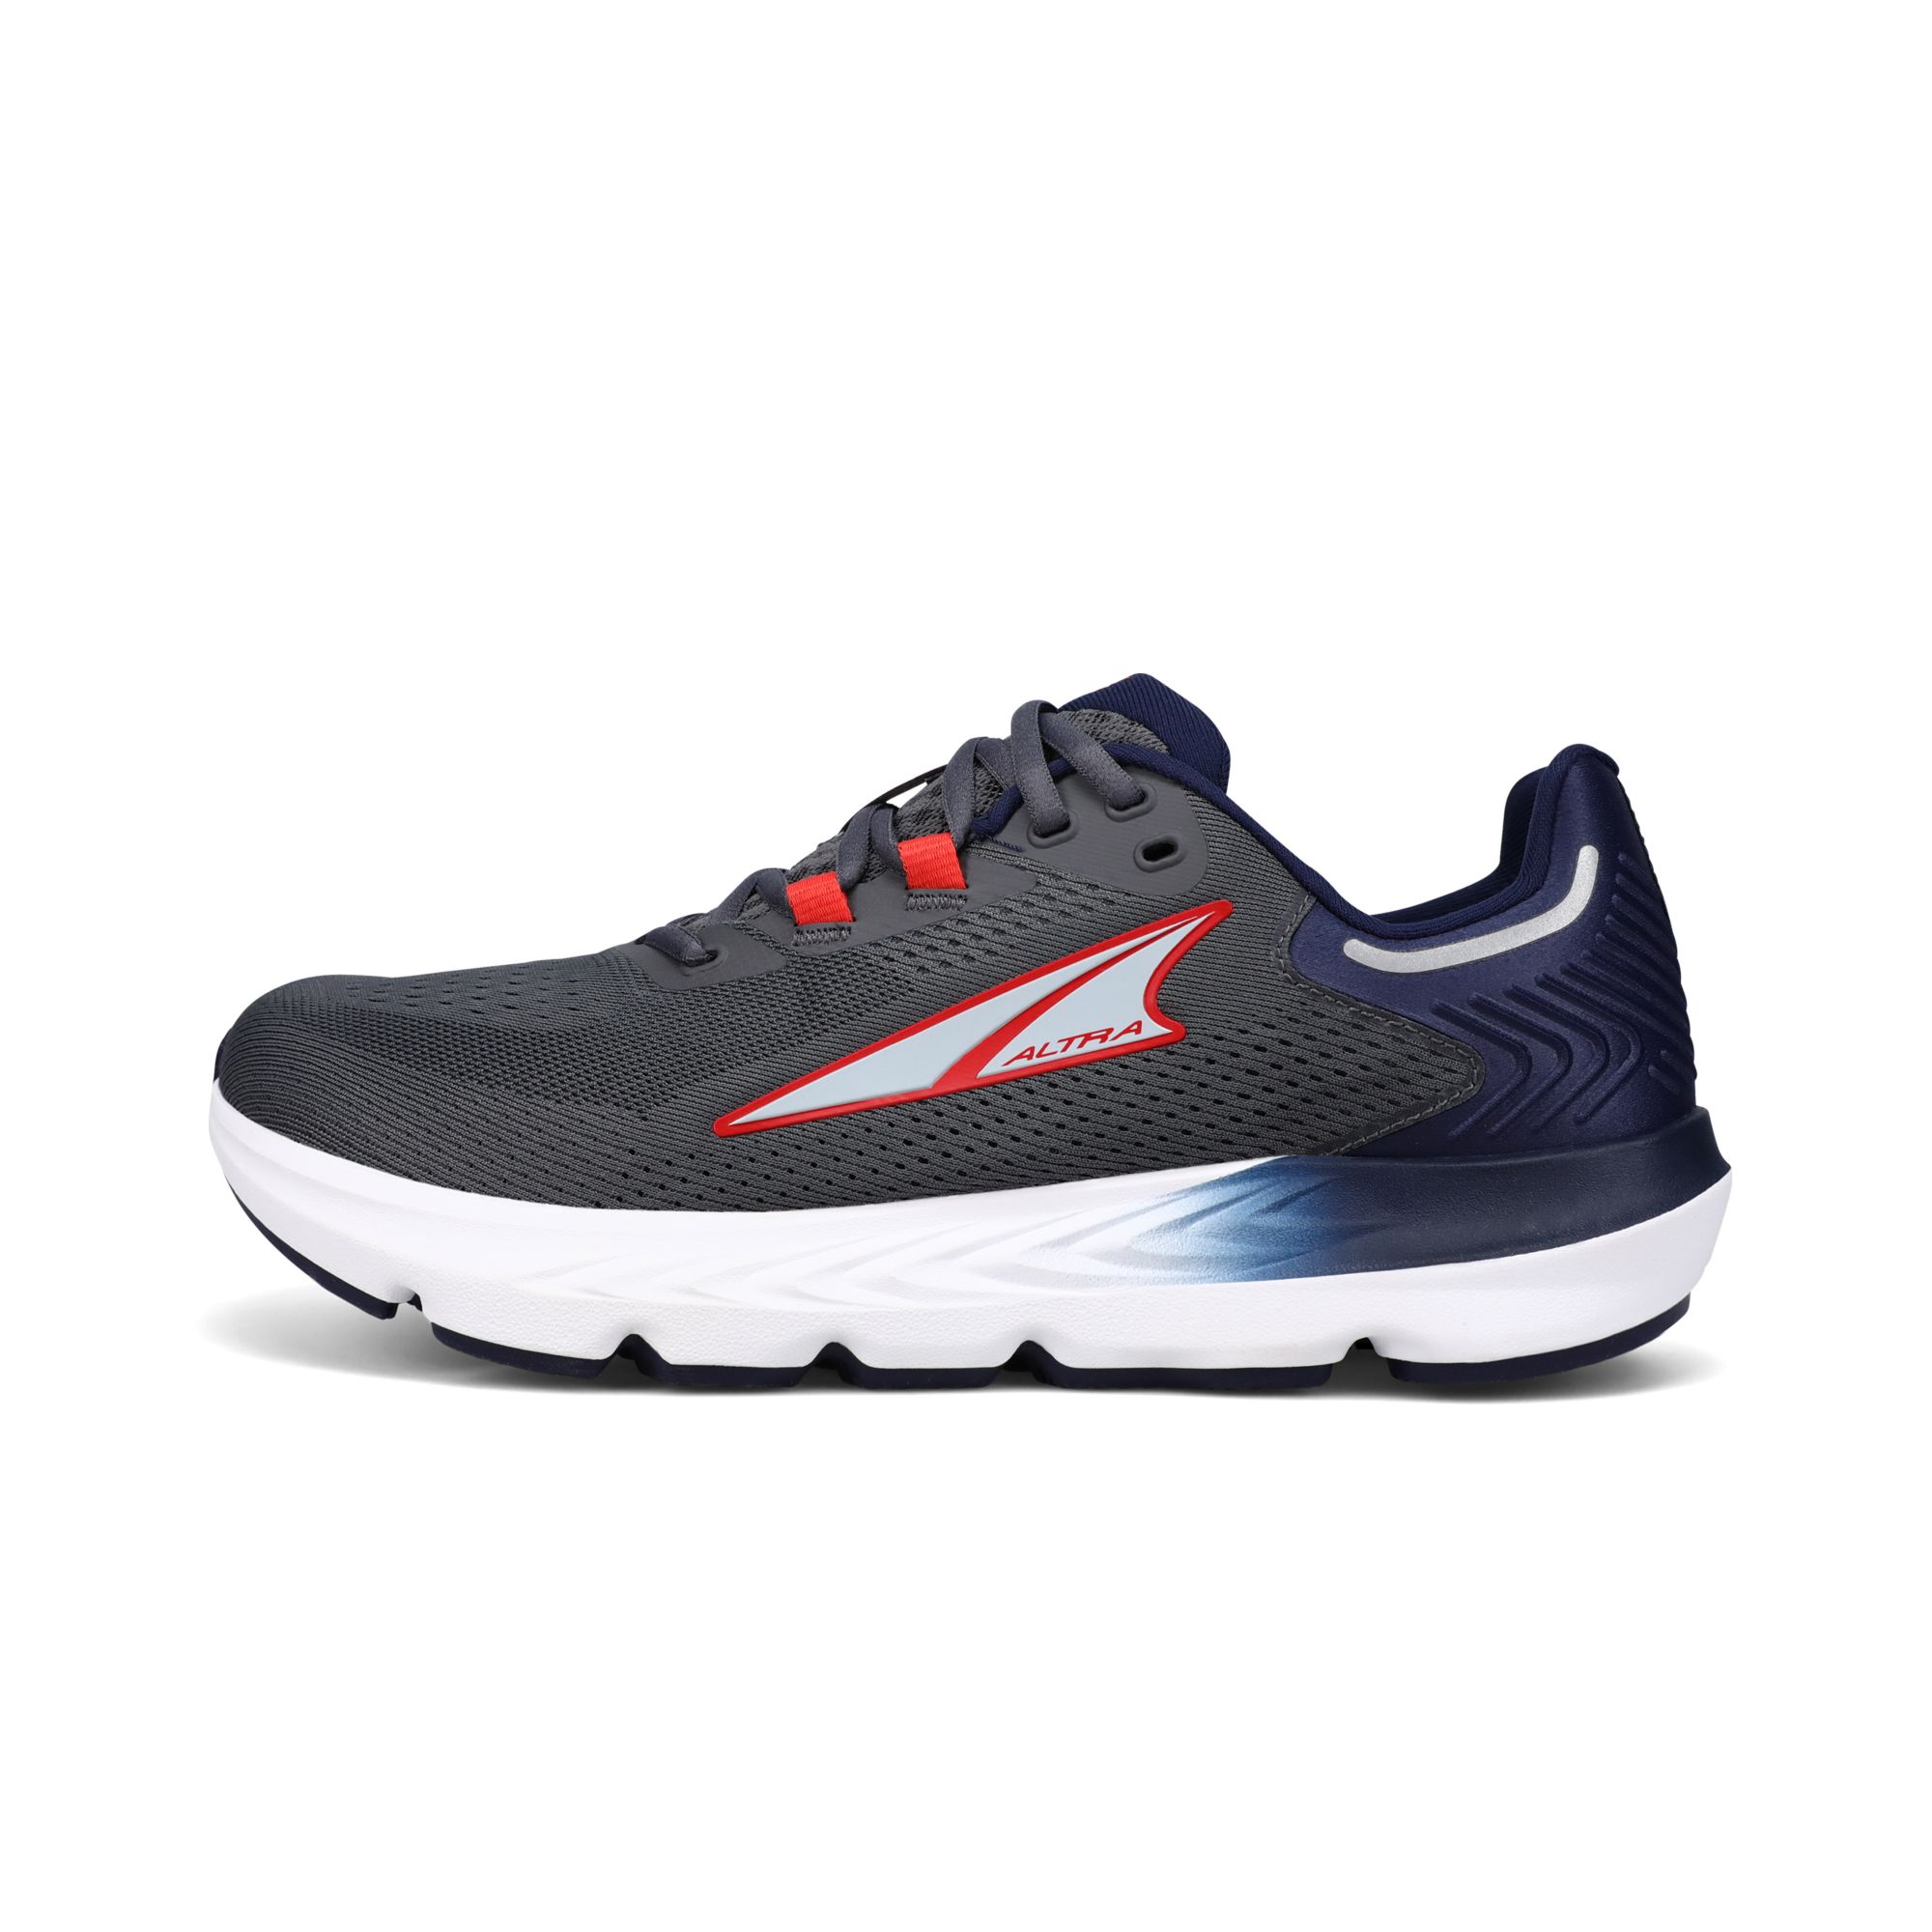 Men's Road Running Shoes - Long Distance & Road Racing Shoes | Altra ...